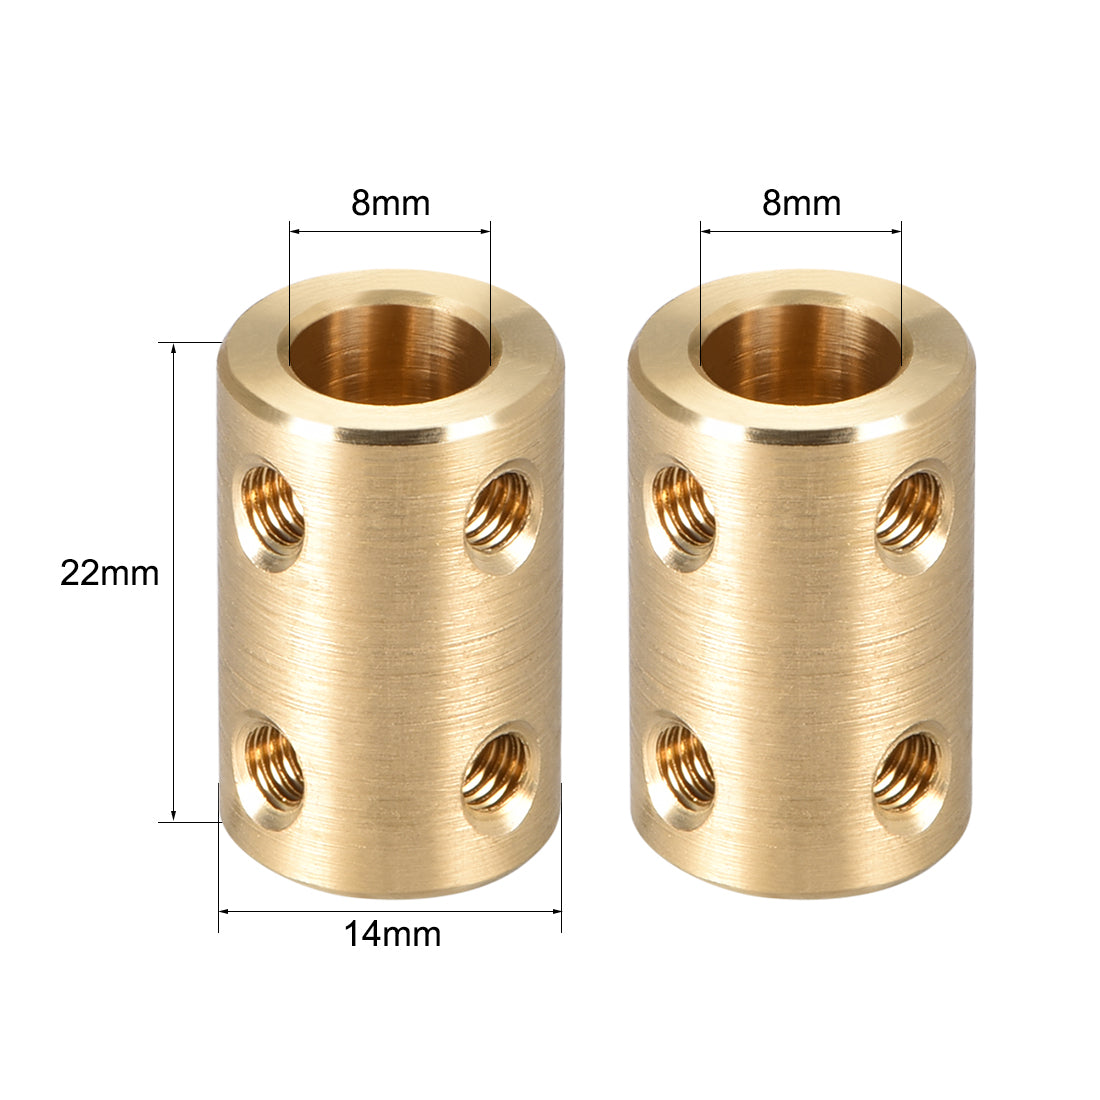 uxcell Uxcell Shaft Coupling 8mm to 8mm Bore L22xD14 Robot Motor Wheel Rigid  Connector Gold Tone 2 Pcs